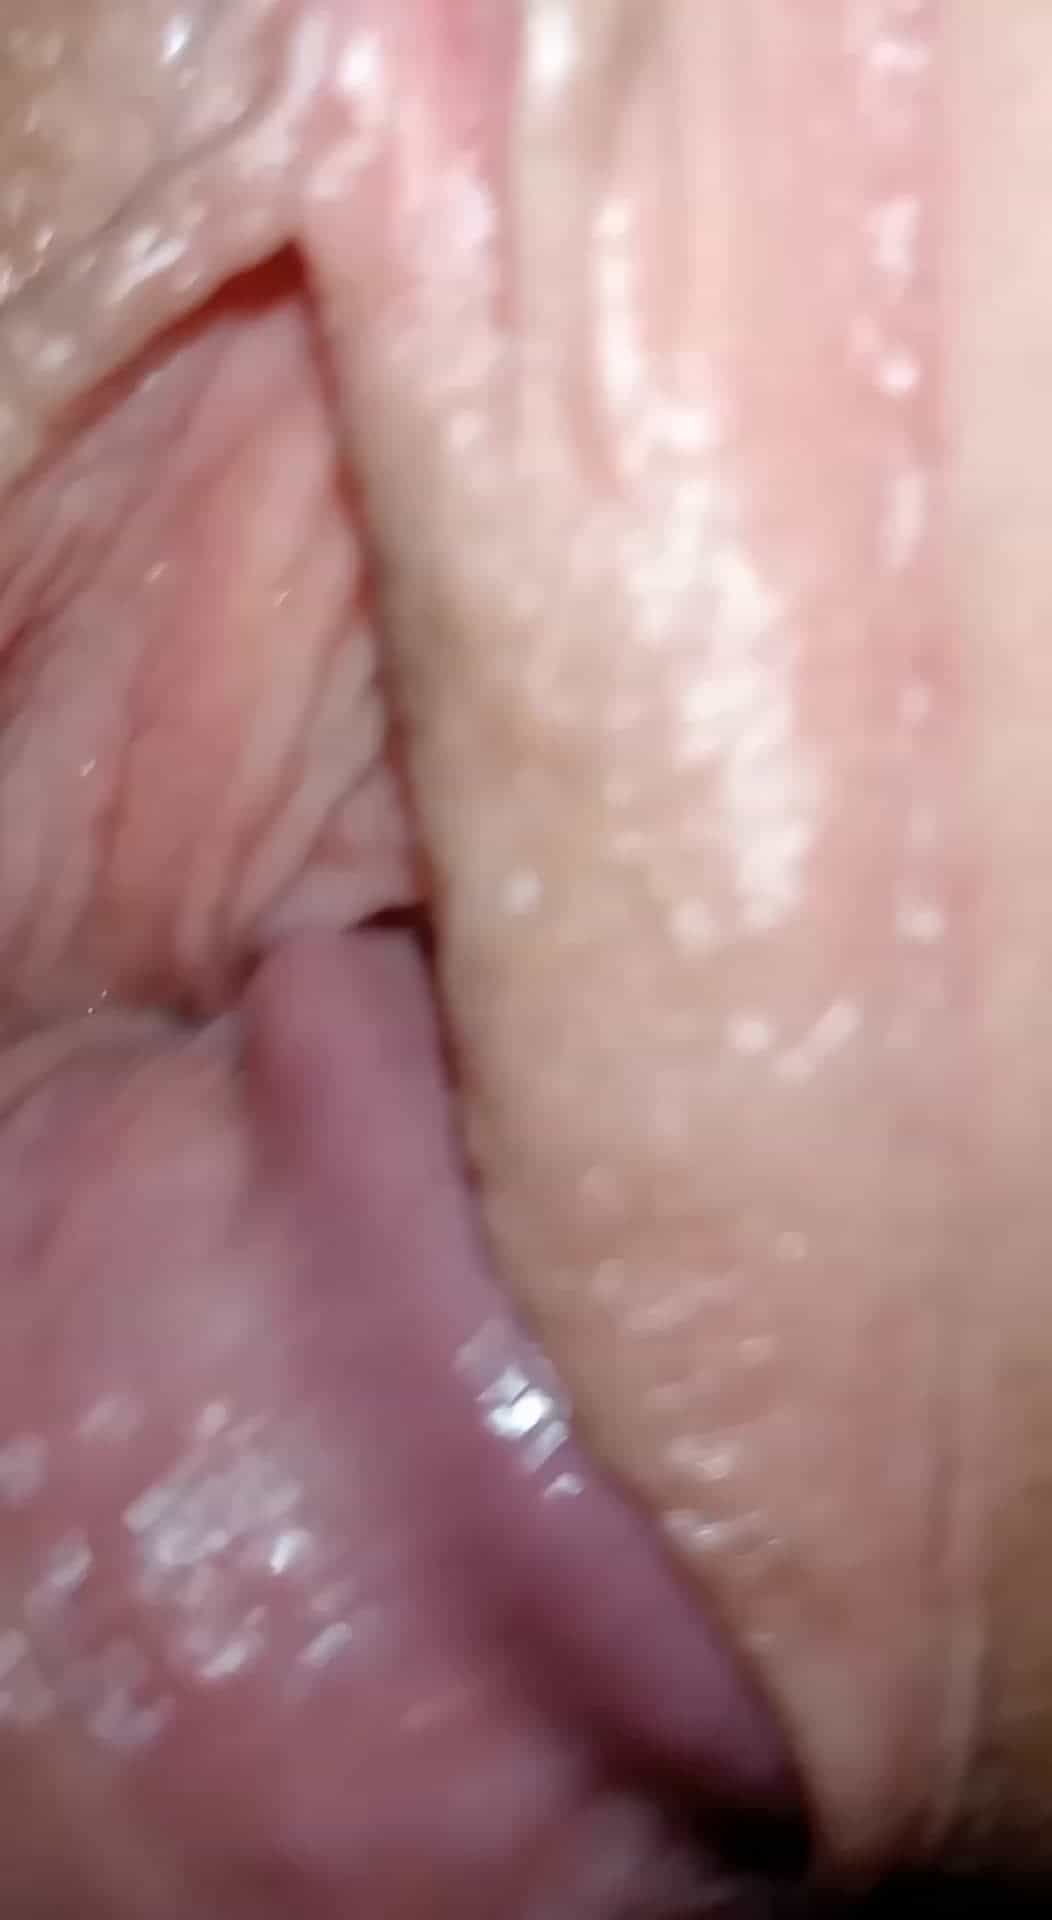 I love my cunt dripping with cum, it's just pouring out, dripping down my crack, 47